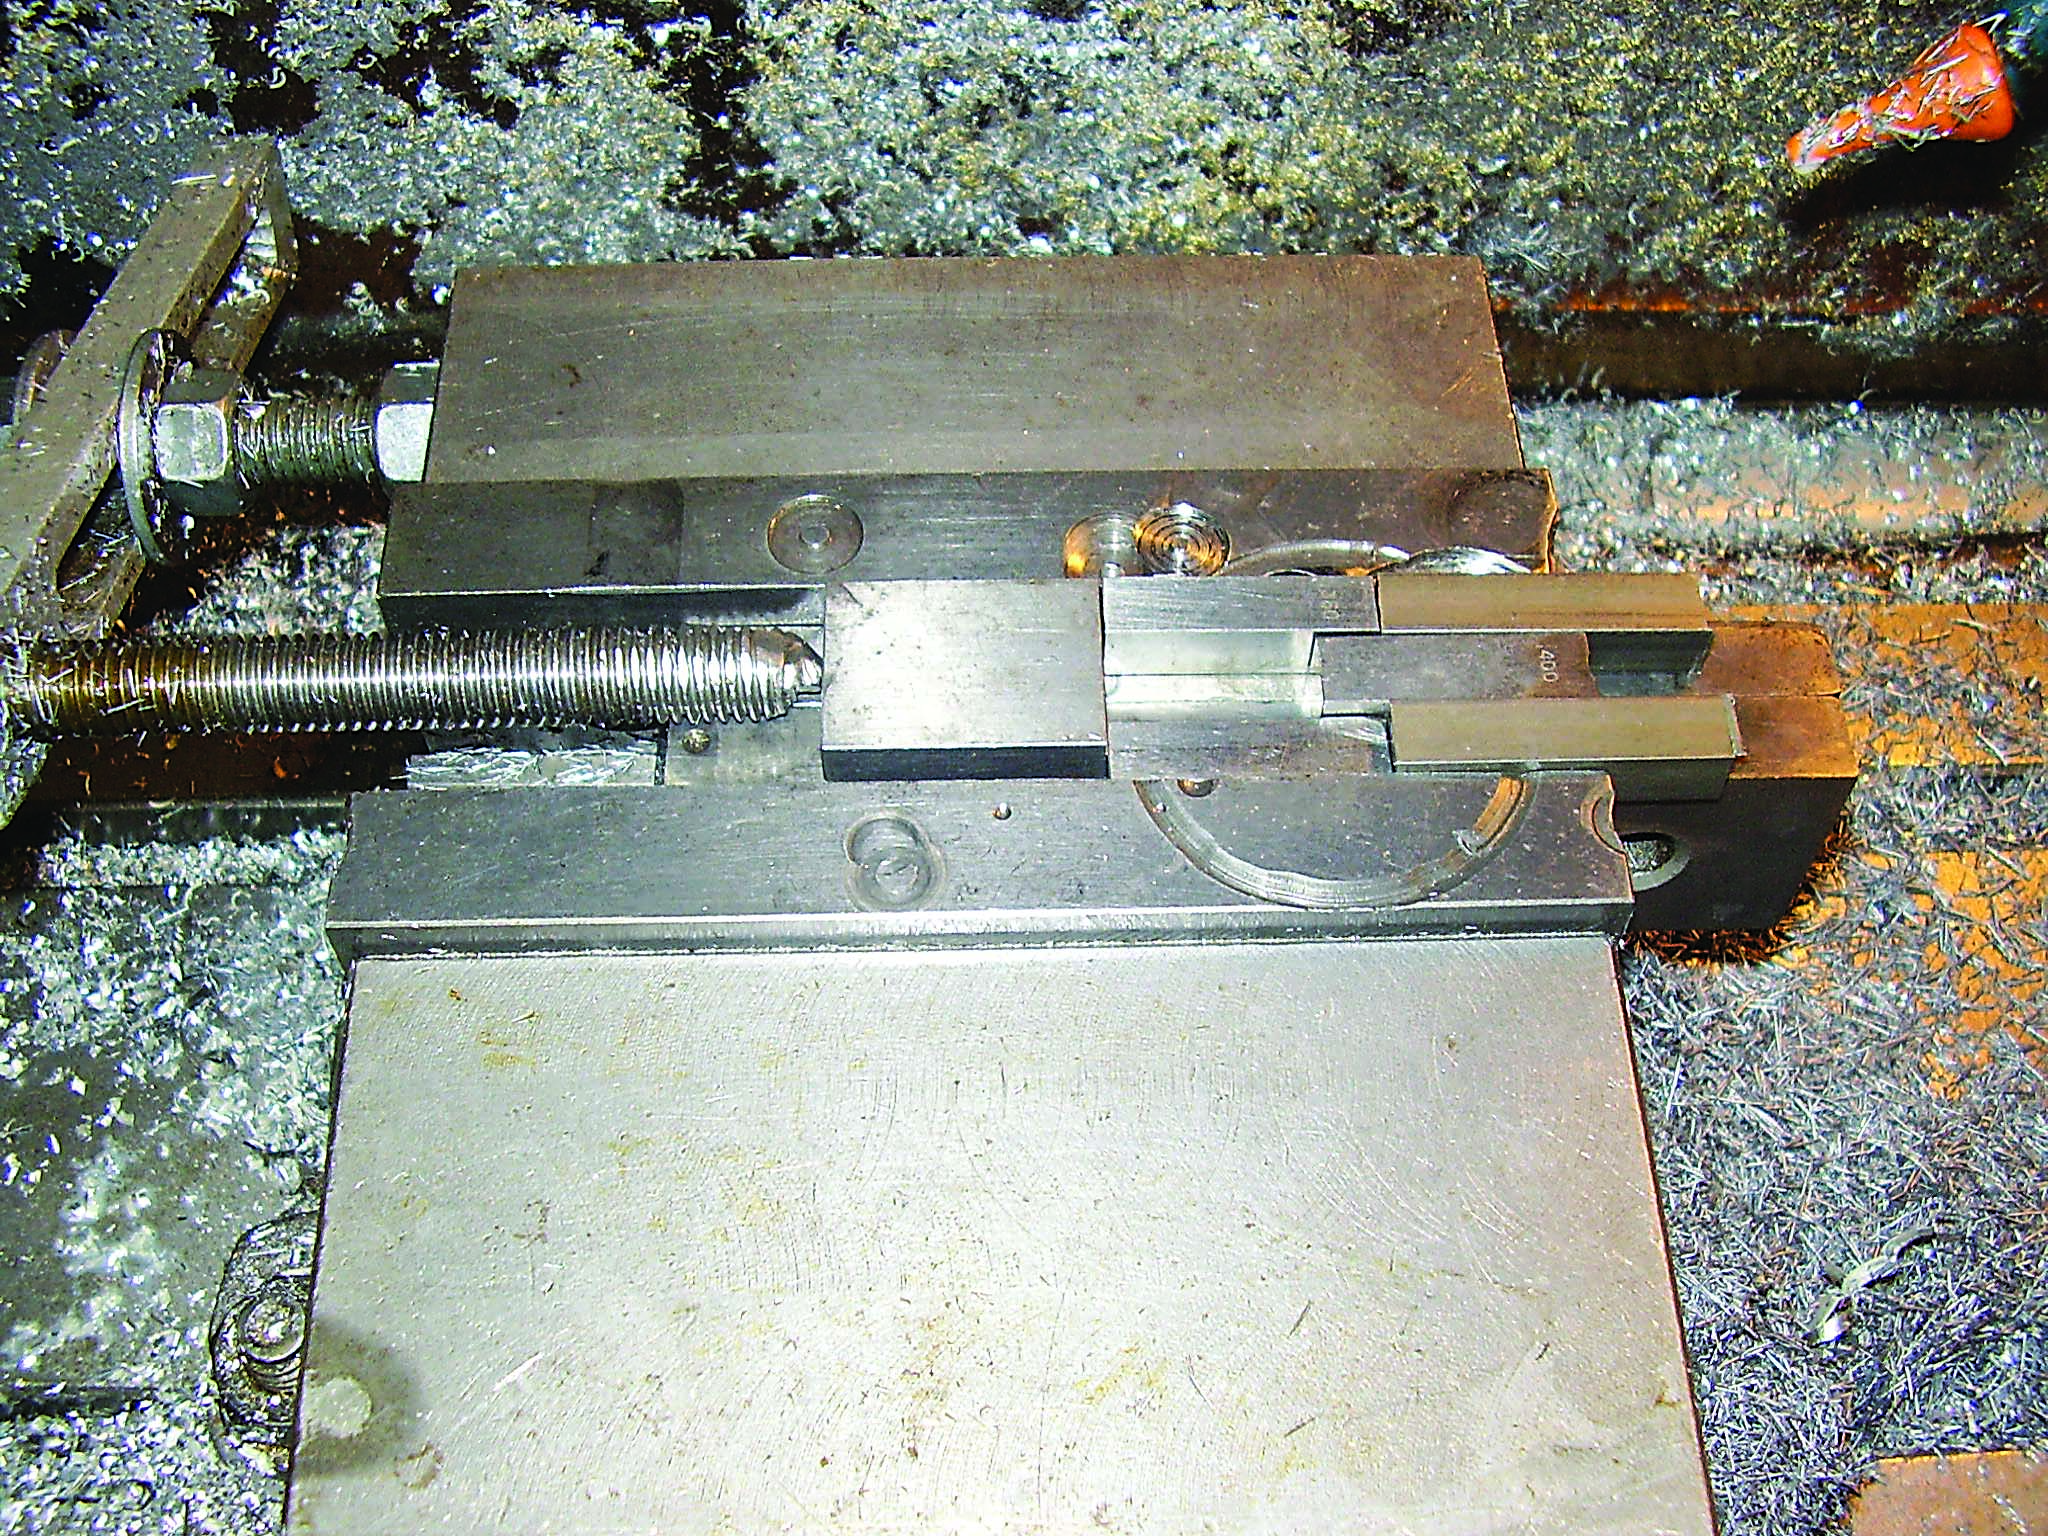 This photograph shows all the pieces in the vise to set the position of the key blanks.